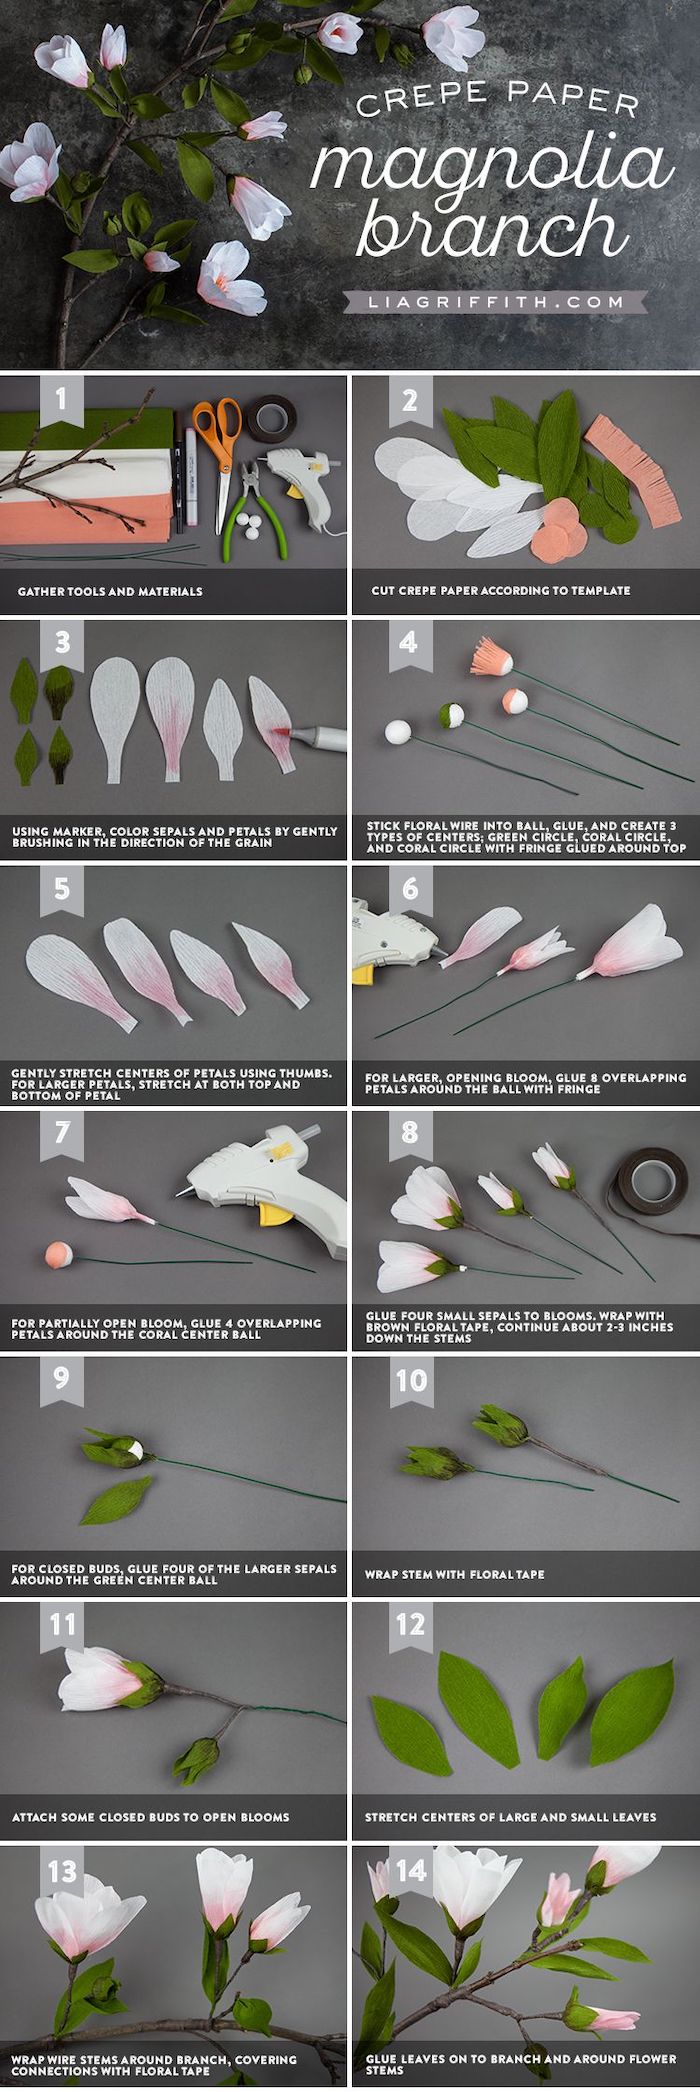 how to make a magnolia branch out of crepe paper, photo collage of step by step diy tutorial, crepe paper flowers